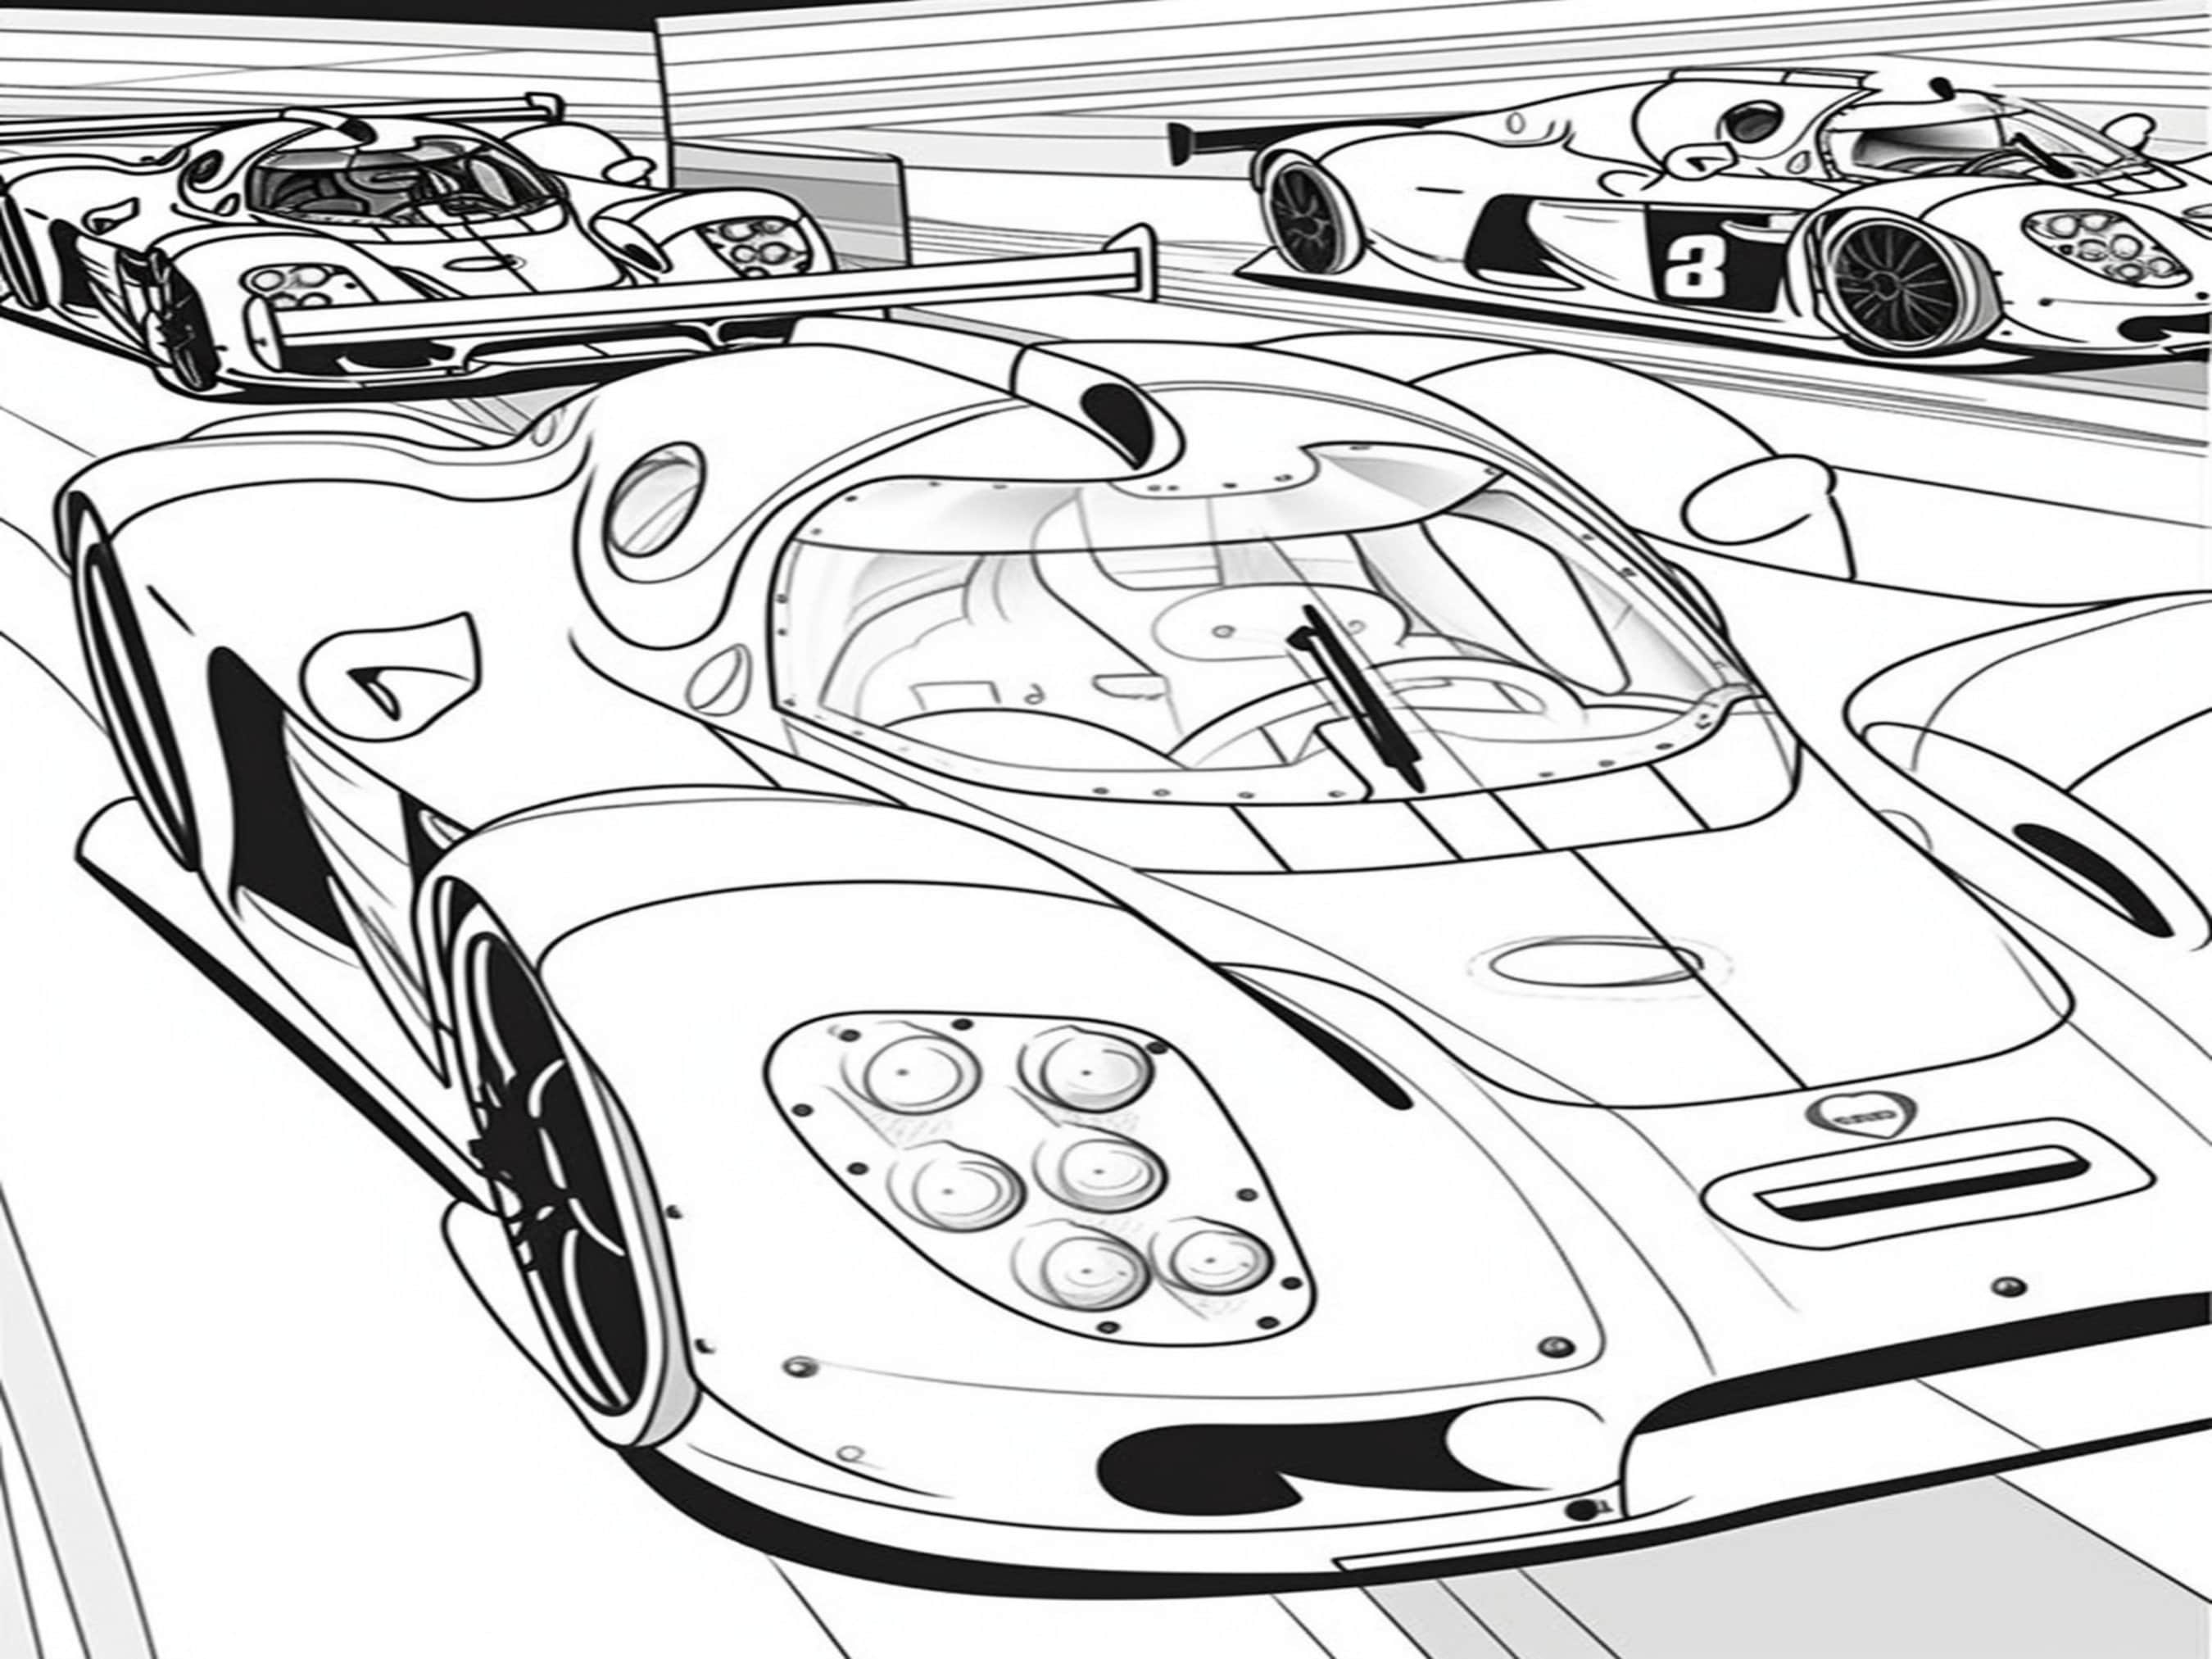 Speed Racer coloring page (033) @